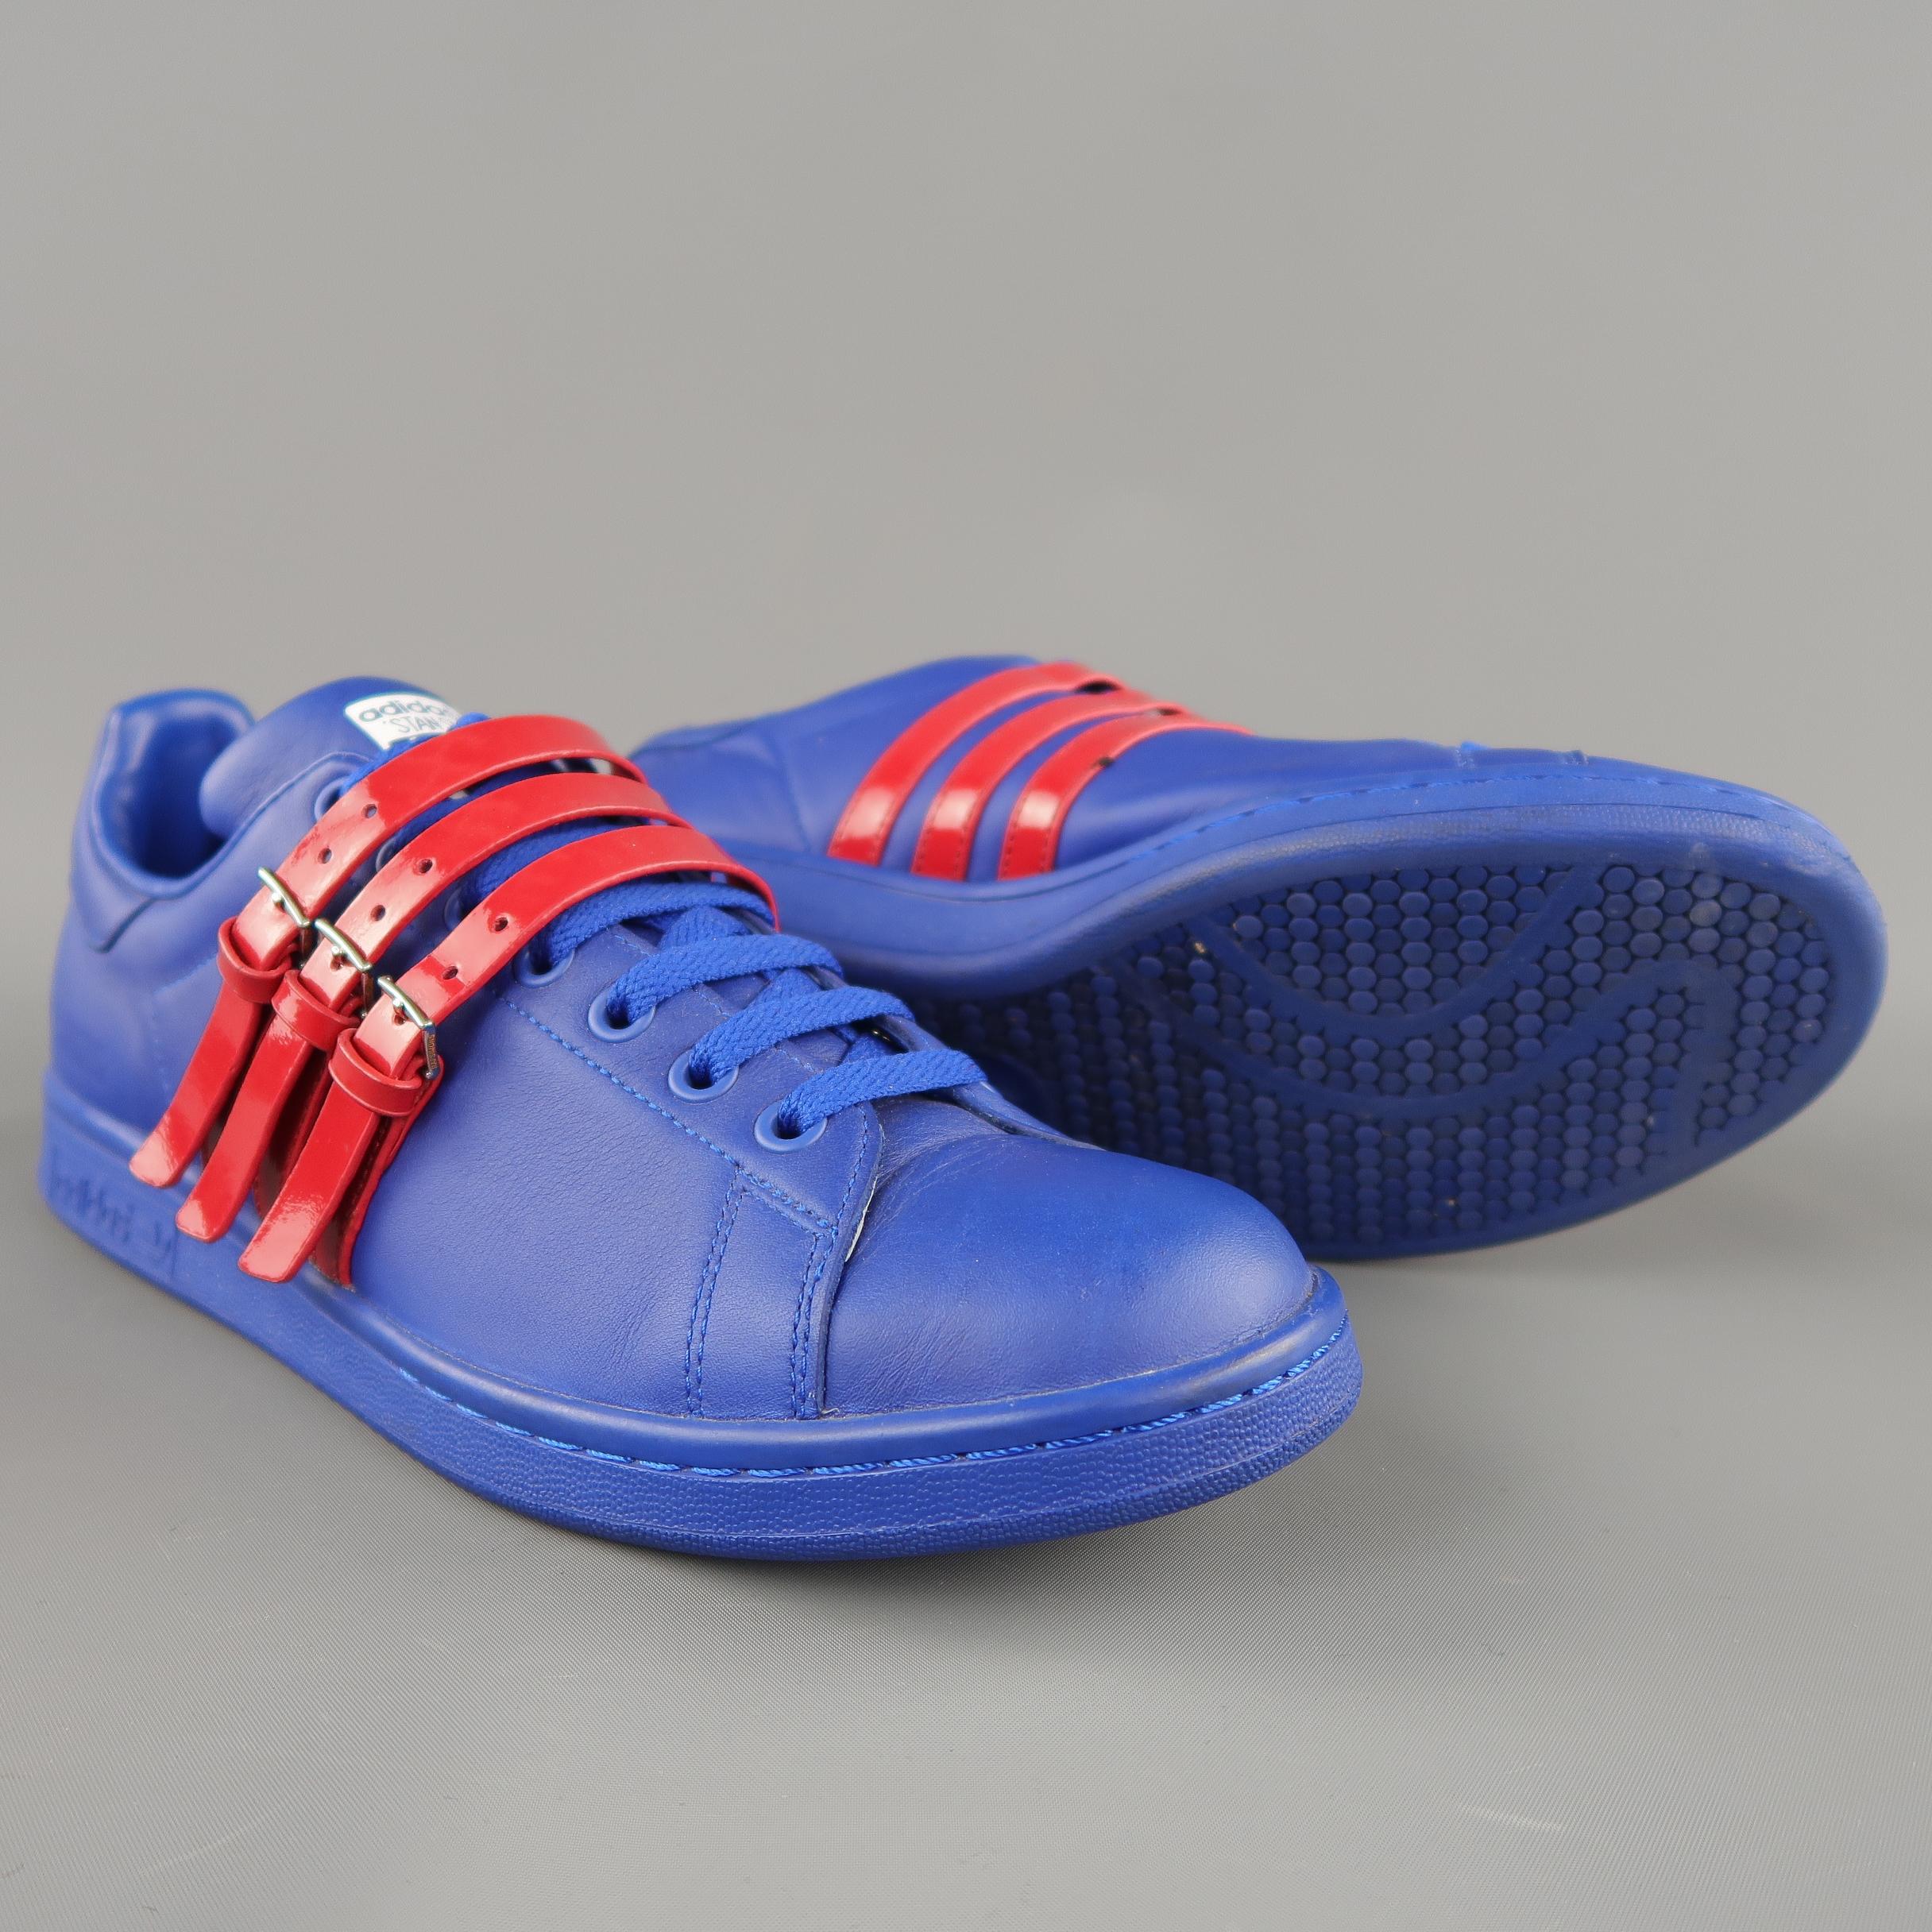 Purple ADIDAS x RAF SIMONS Size 9.5 Royal Blue & Red Leather Stan Smith Sneakers